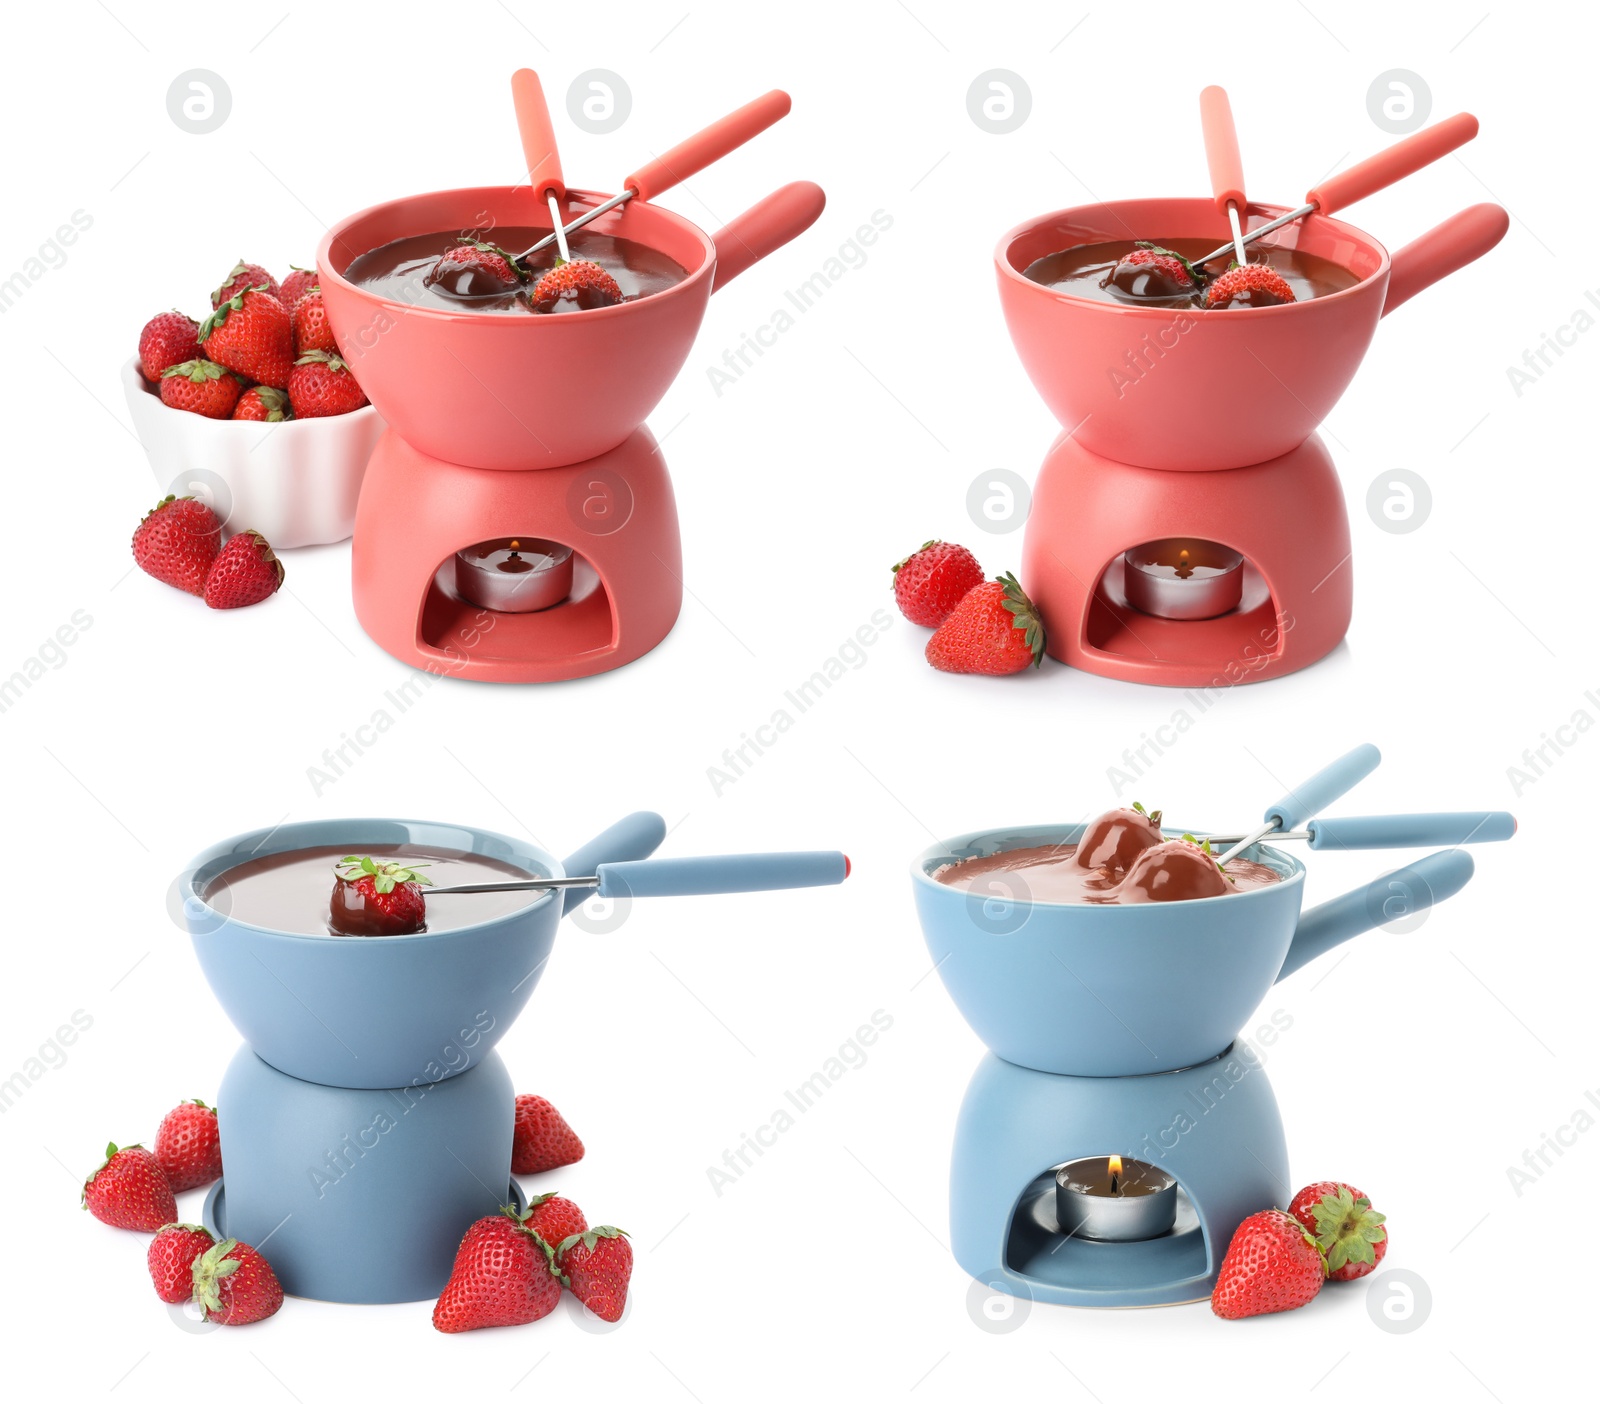 Image of Set with fondue pots with chocolate and strawberries on white background